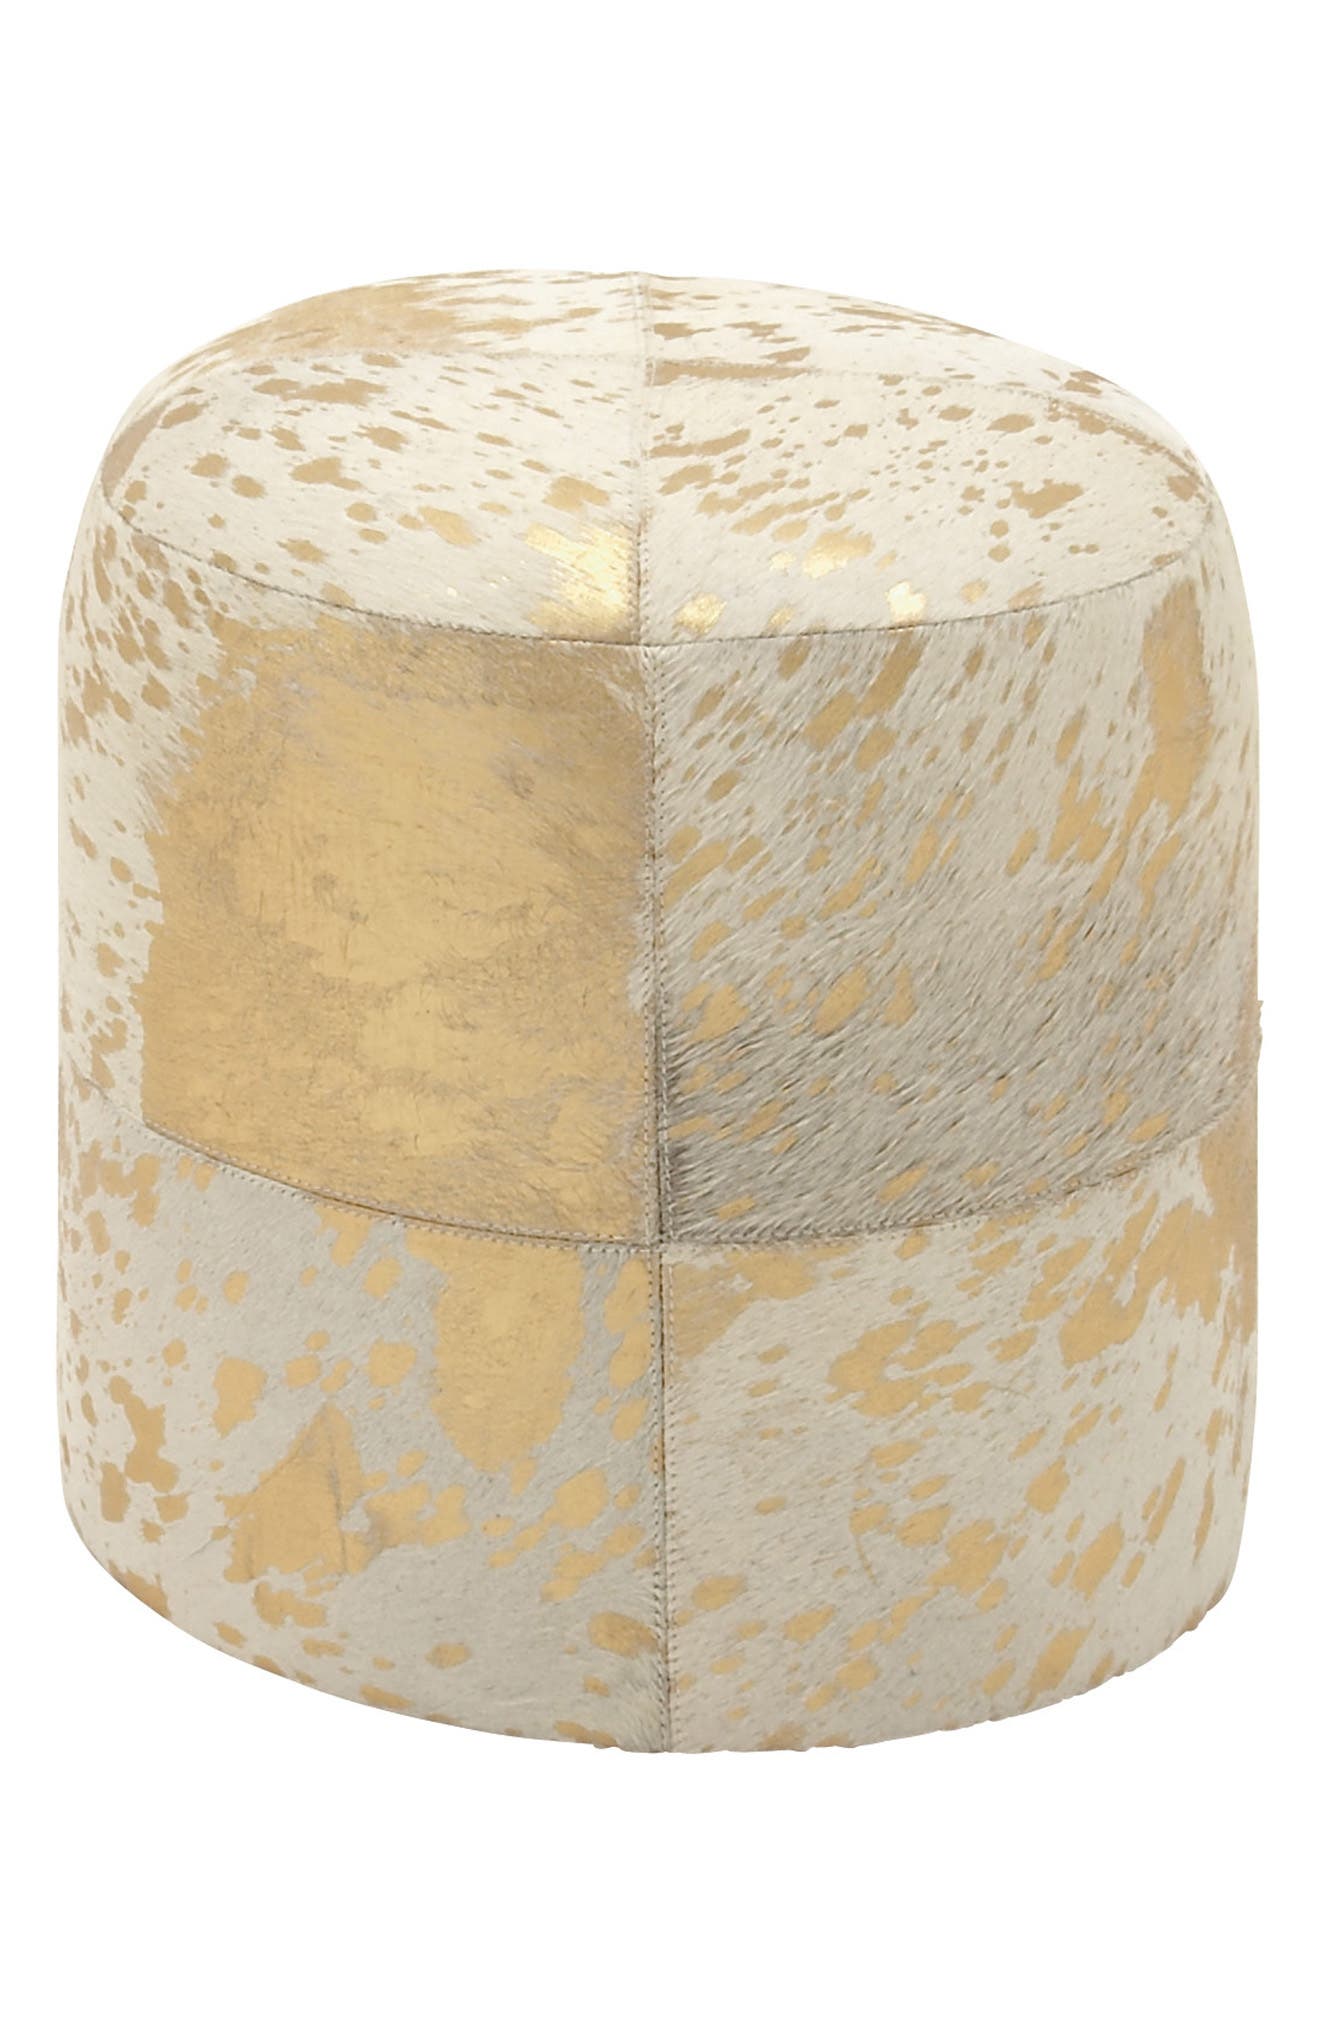 Willow Row Gold Wood Glam Ottoman